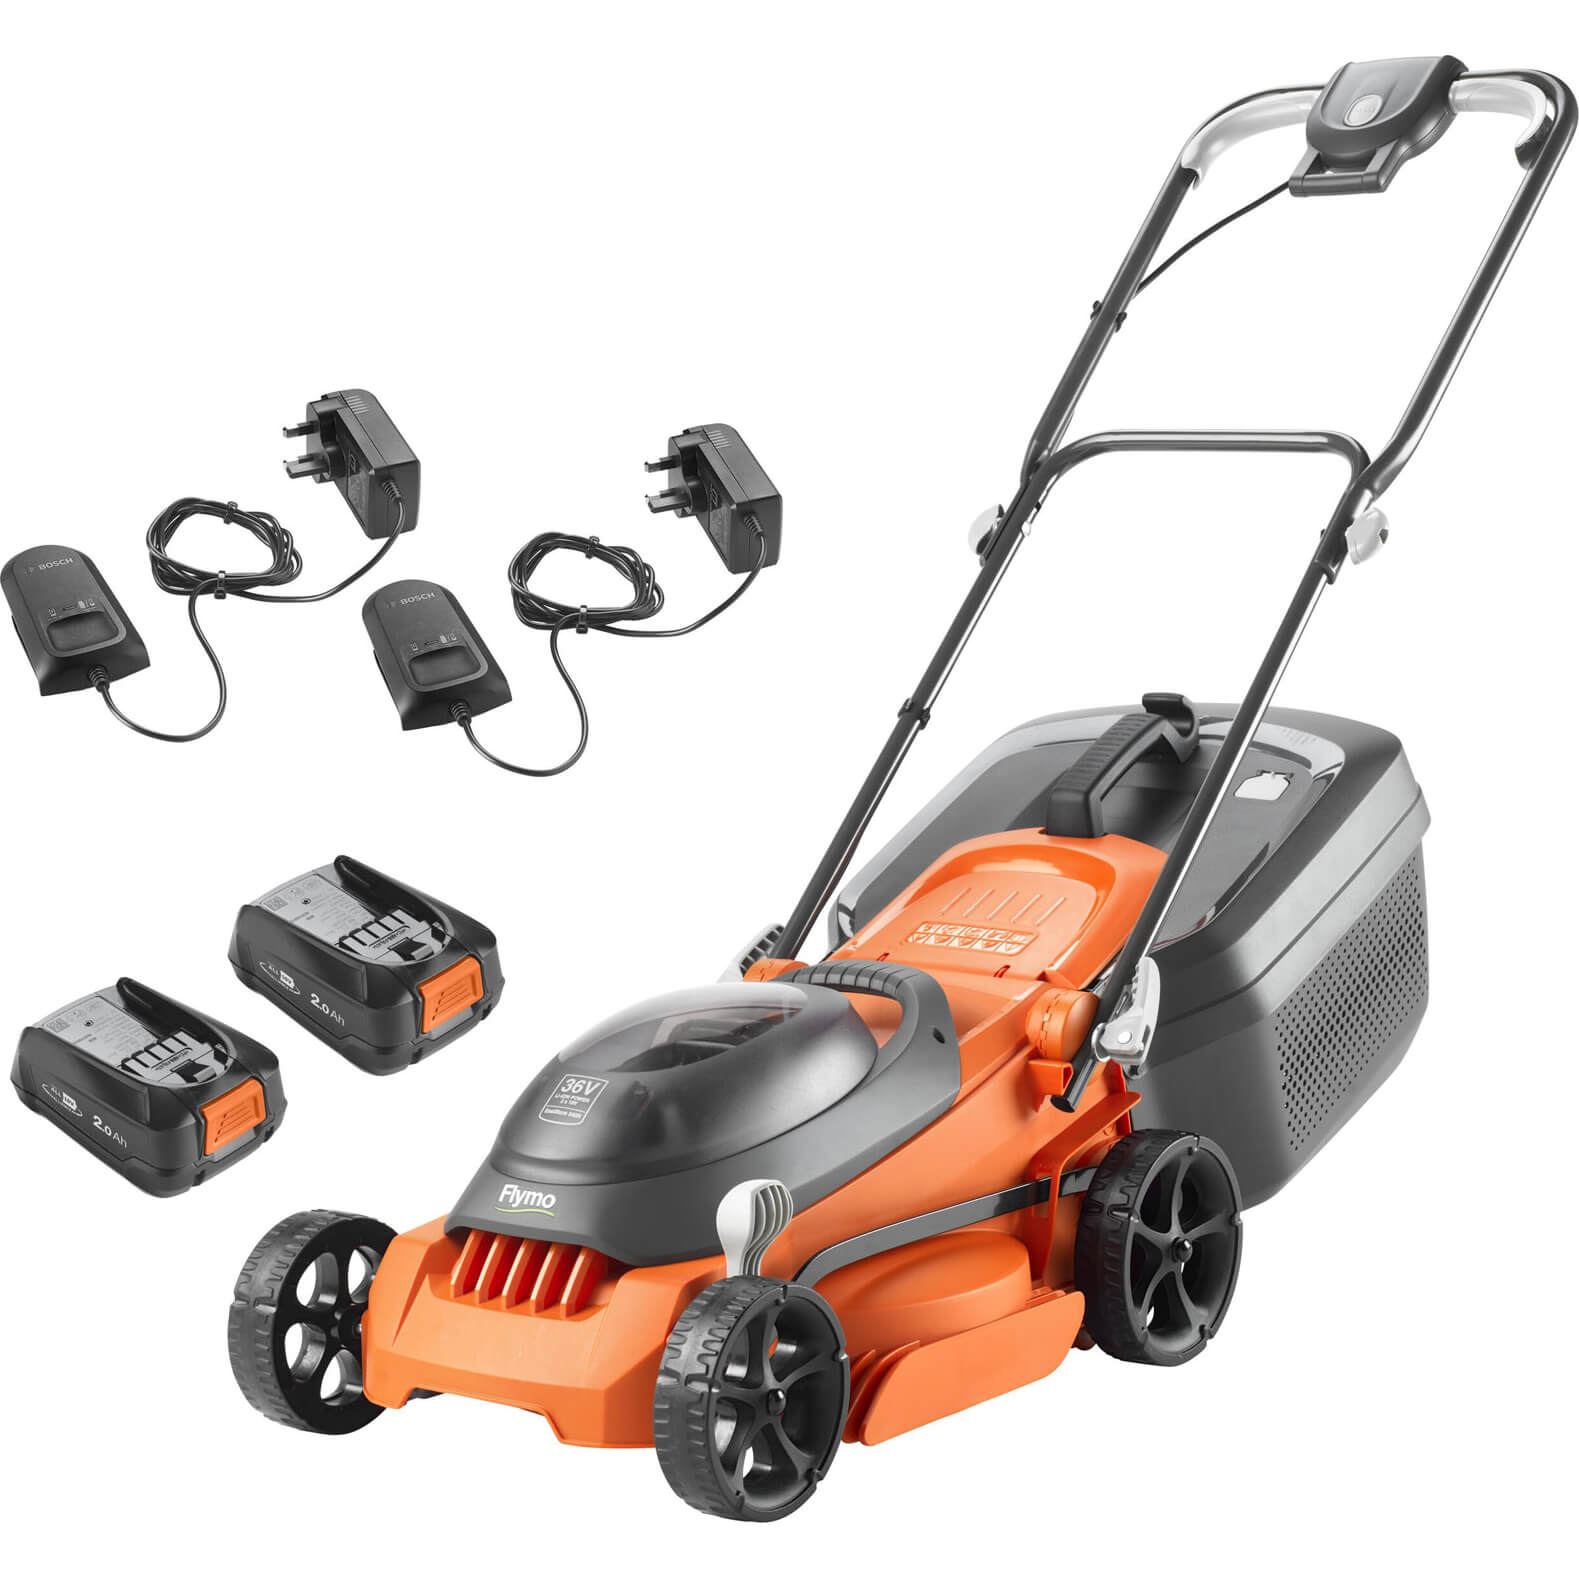 Image of Flymo EASISTORE 340R P4A 36v Cordless Rotary Lawnmower 340mm 2 x 2ah Li-ion Charger